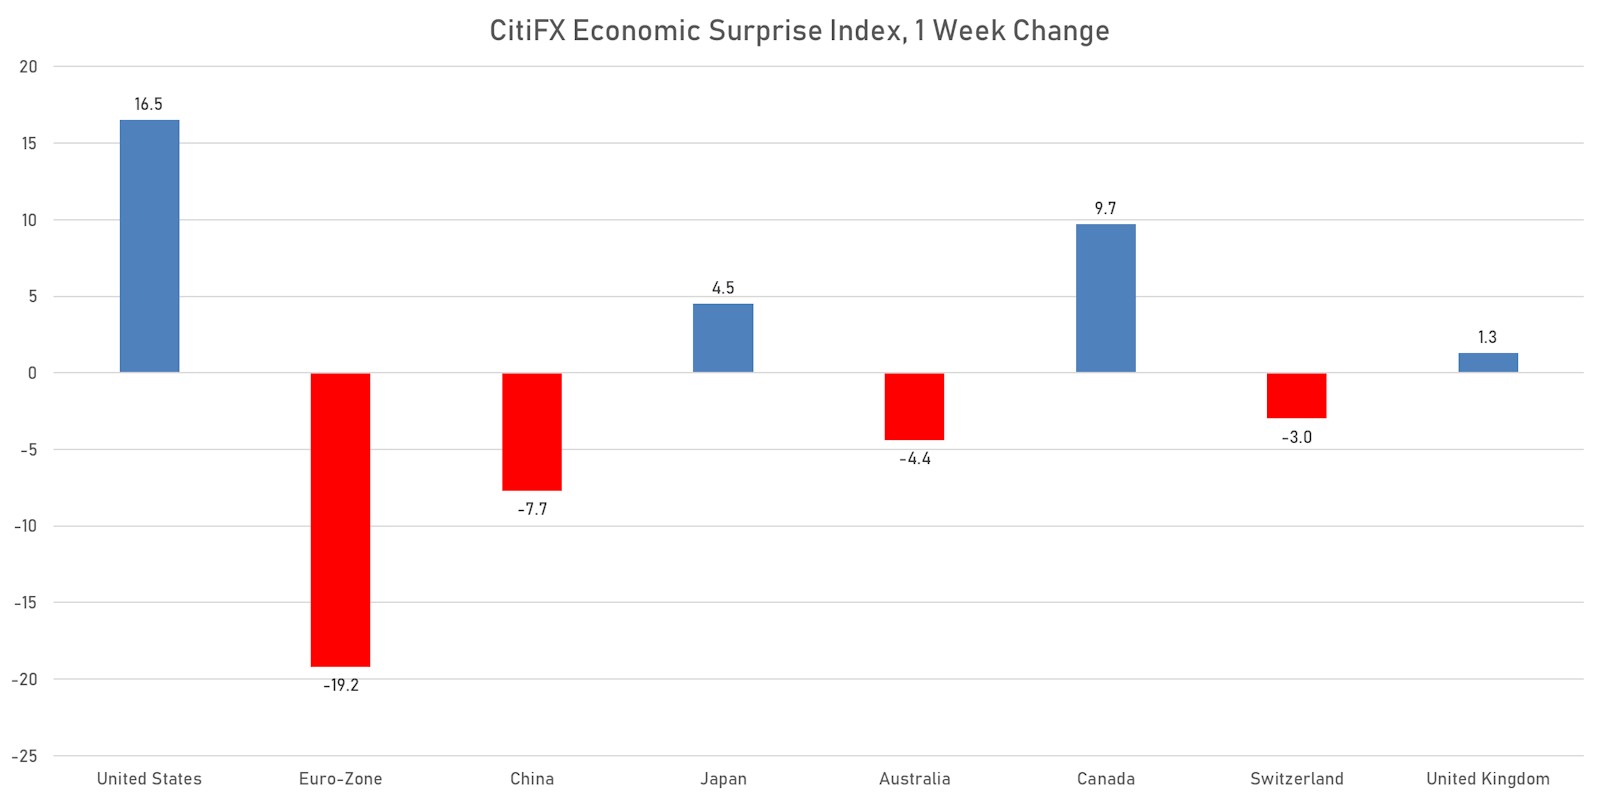 Weekly Changes in CitiFX Economic Surprise Indices | Sources: phipost.com, Refinitiv data 